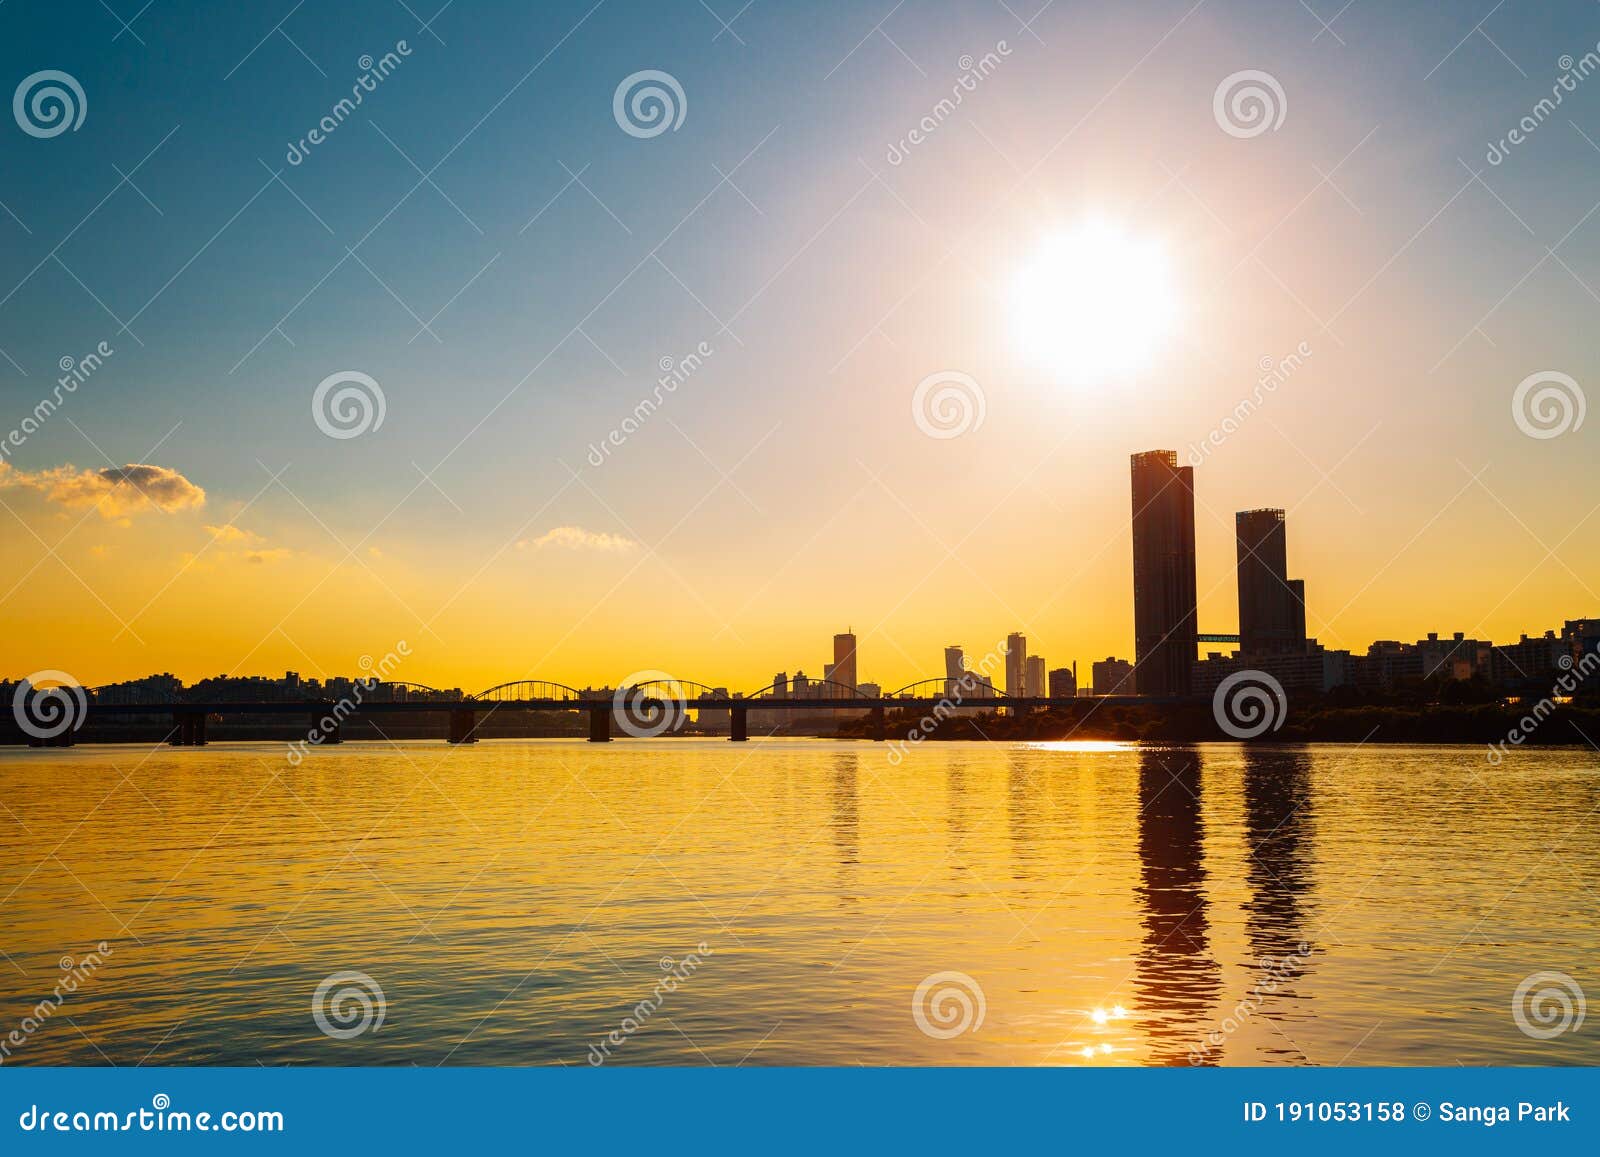 Dongjak Bridge and Modern Cityscape with Han River Under Dramatic ...